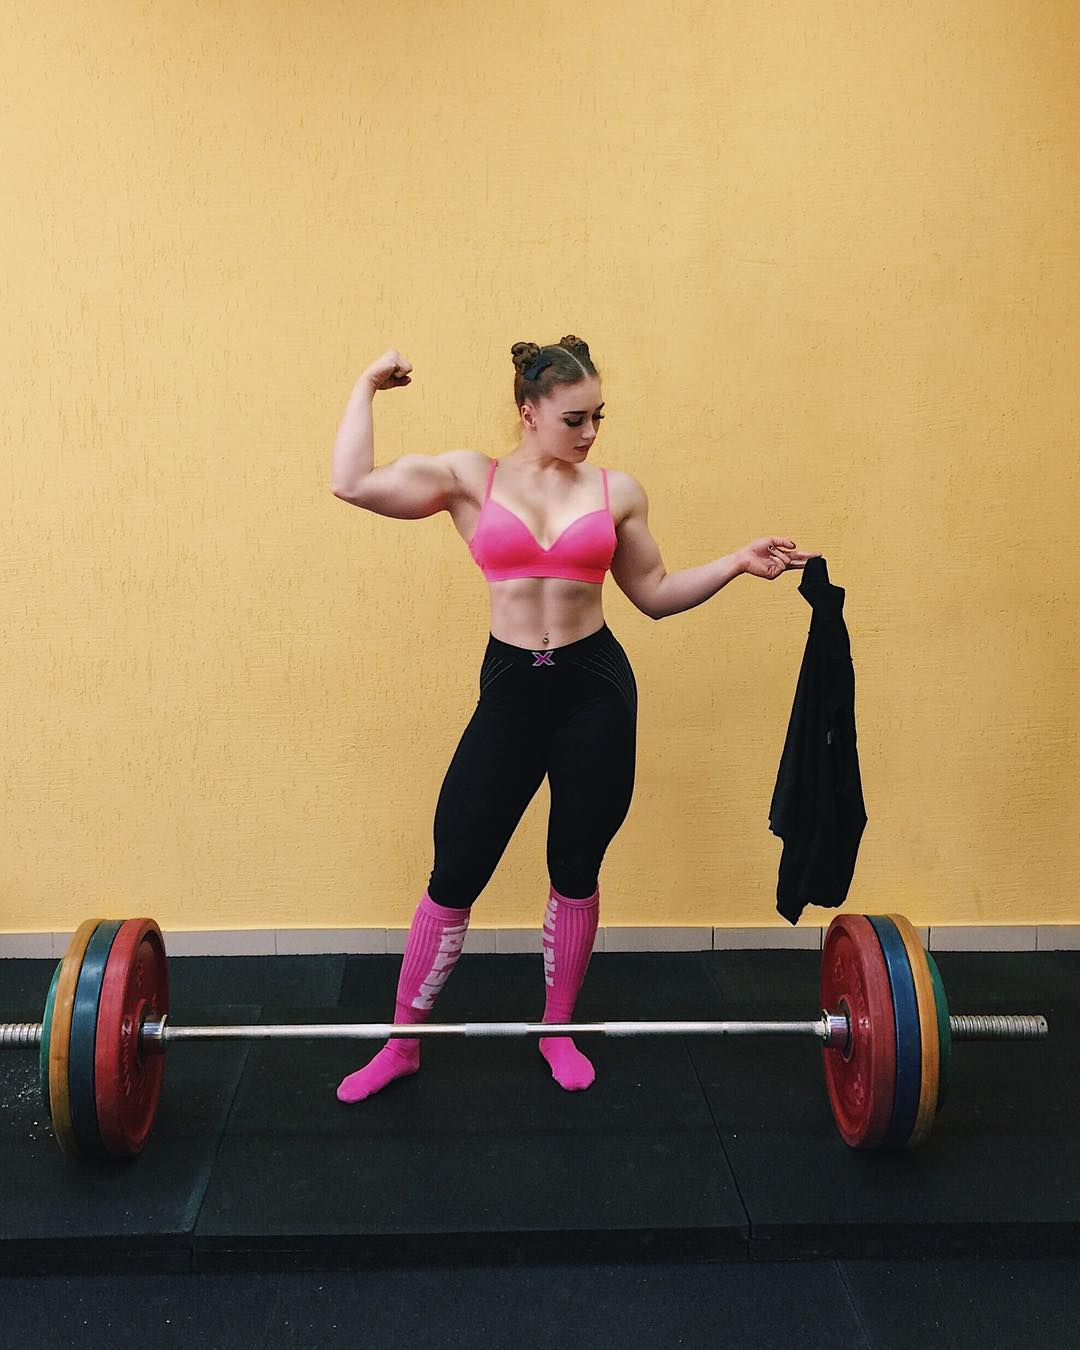 Meet Julia Vins, A Real Life Barbie With A Weight Lifter’s Body